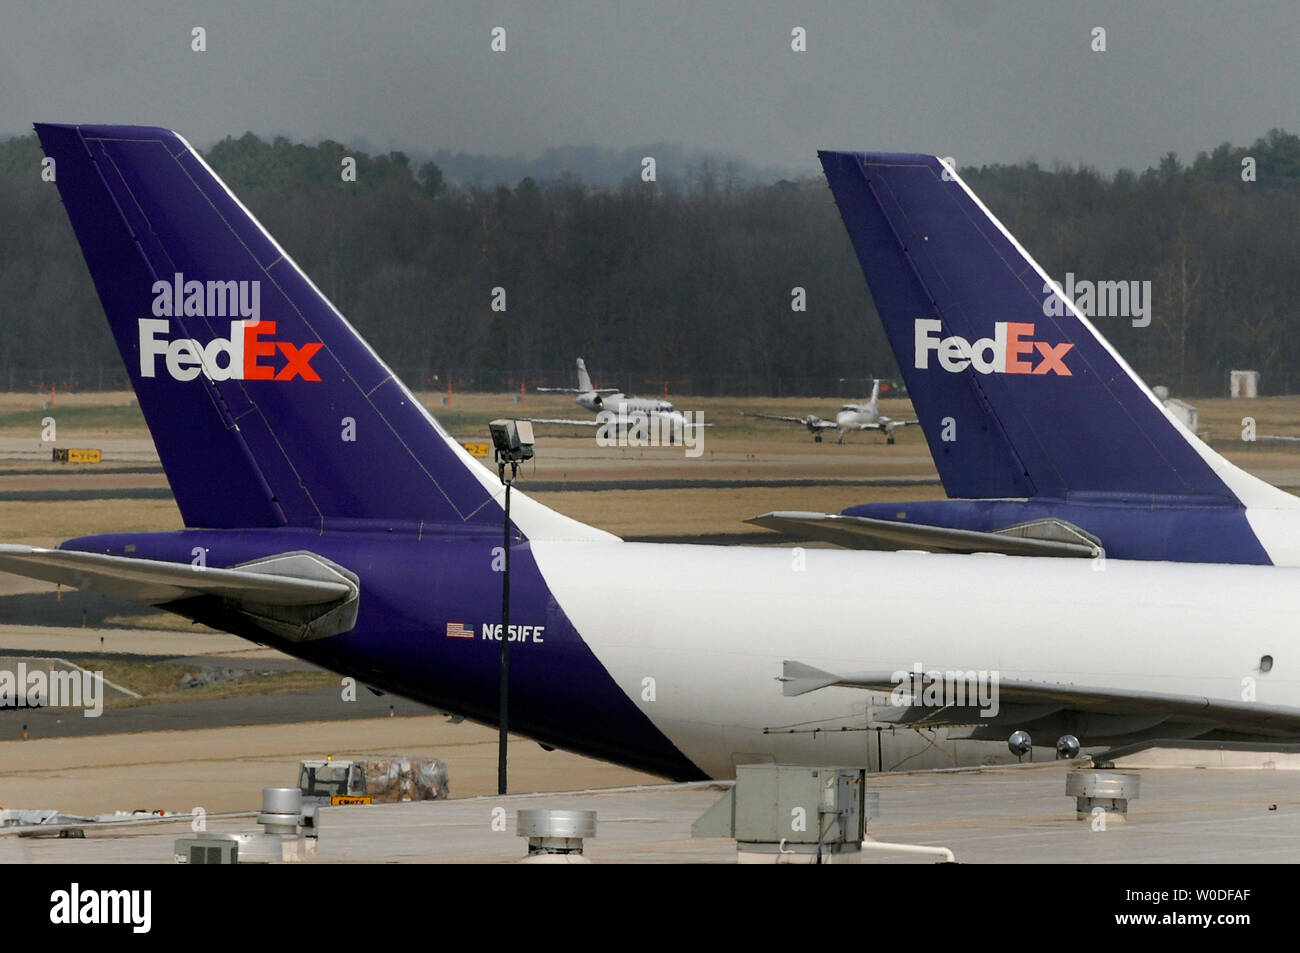 The tail wings of two FedEx cargo planes are seen at Washington Dulles International Airport, in Dulles, Virginia on March 26, 2007. (UPI Photo/Kevin Dietsch) Stock Photo